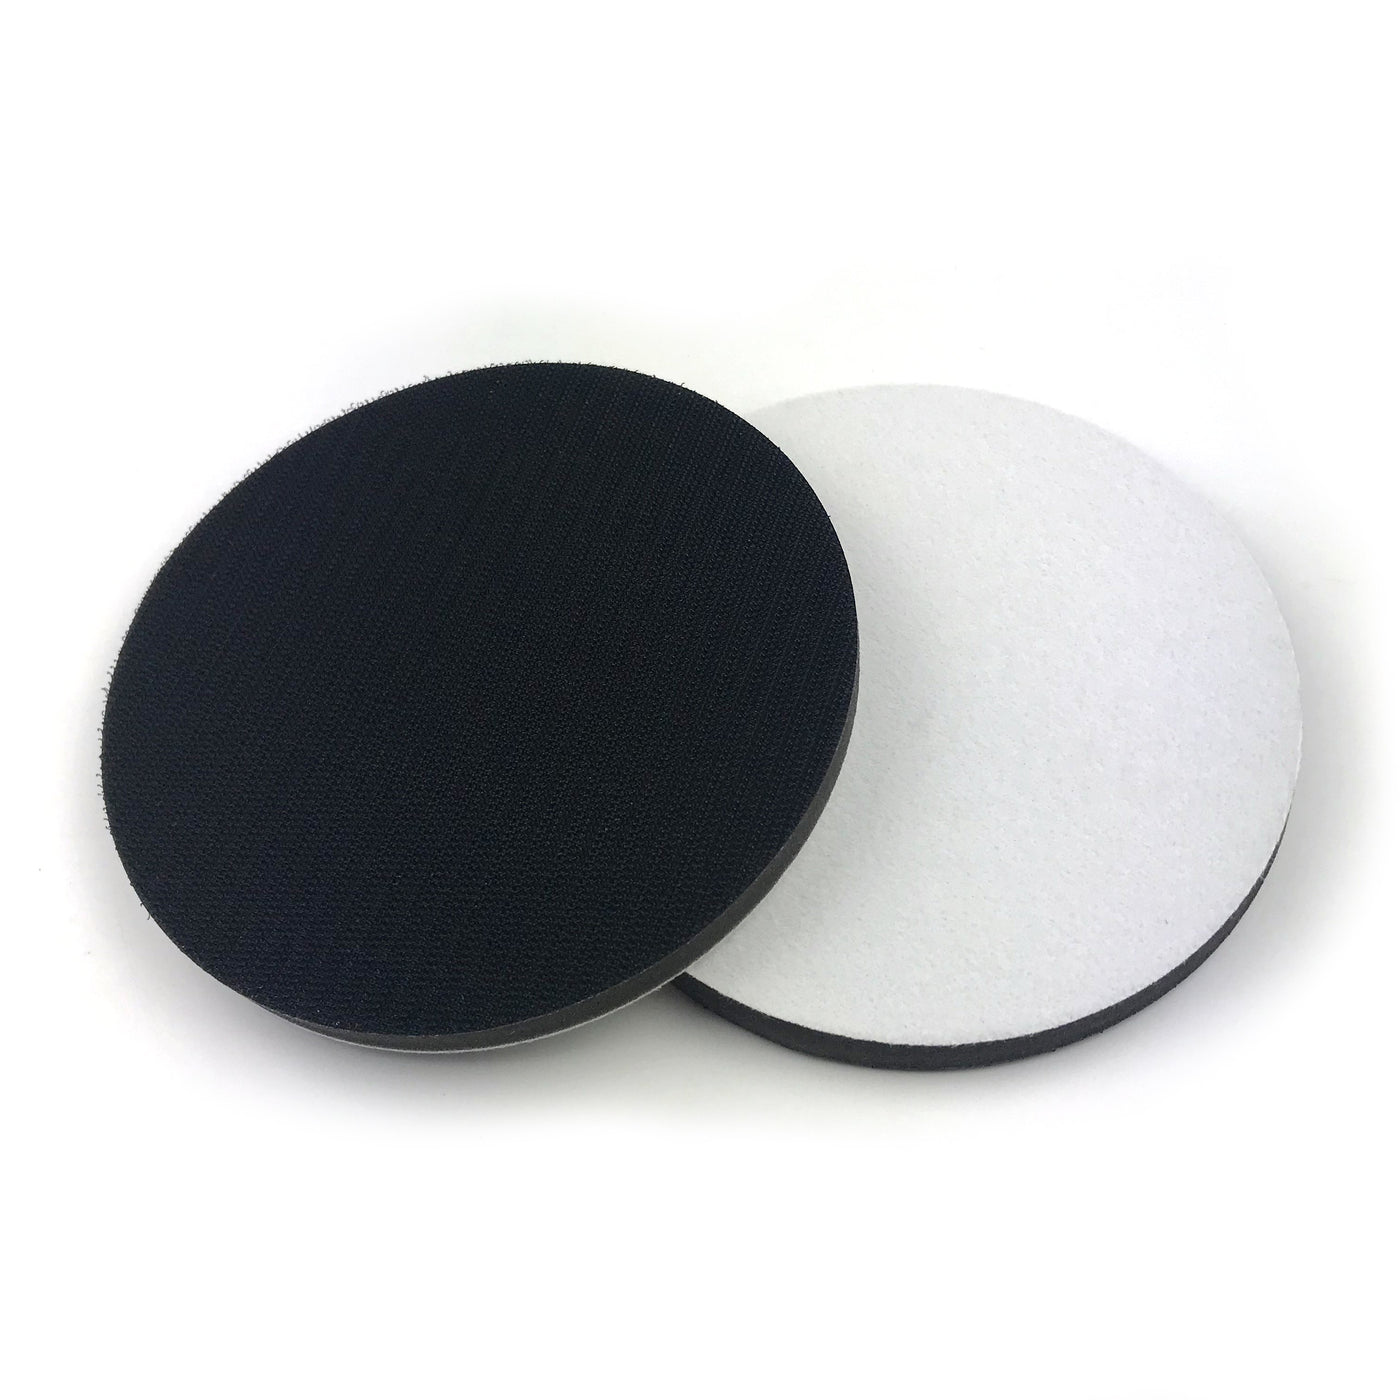 6 Inch No Hole Interface Pads